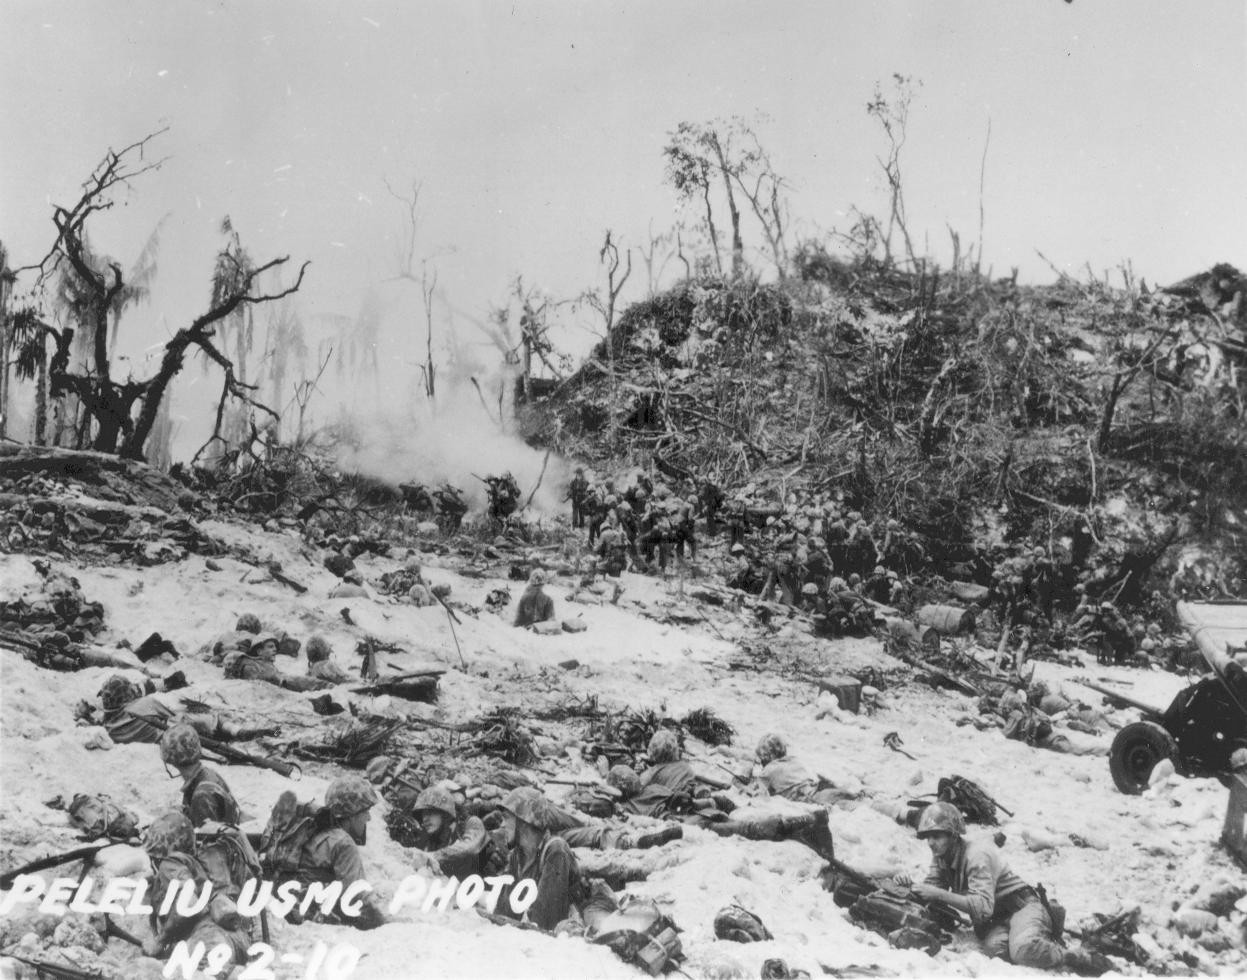 Men of the US 1st Marine Division fighting just beyond White Beach, Peleliu, 15 Sep 1944, photo 2 of 2